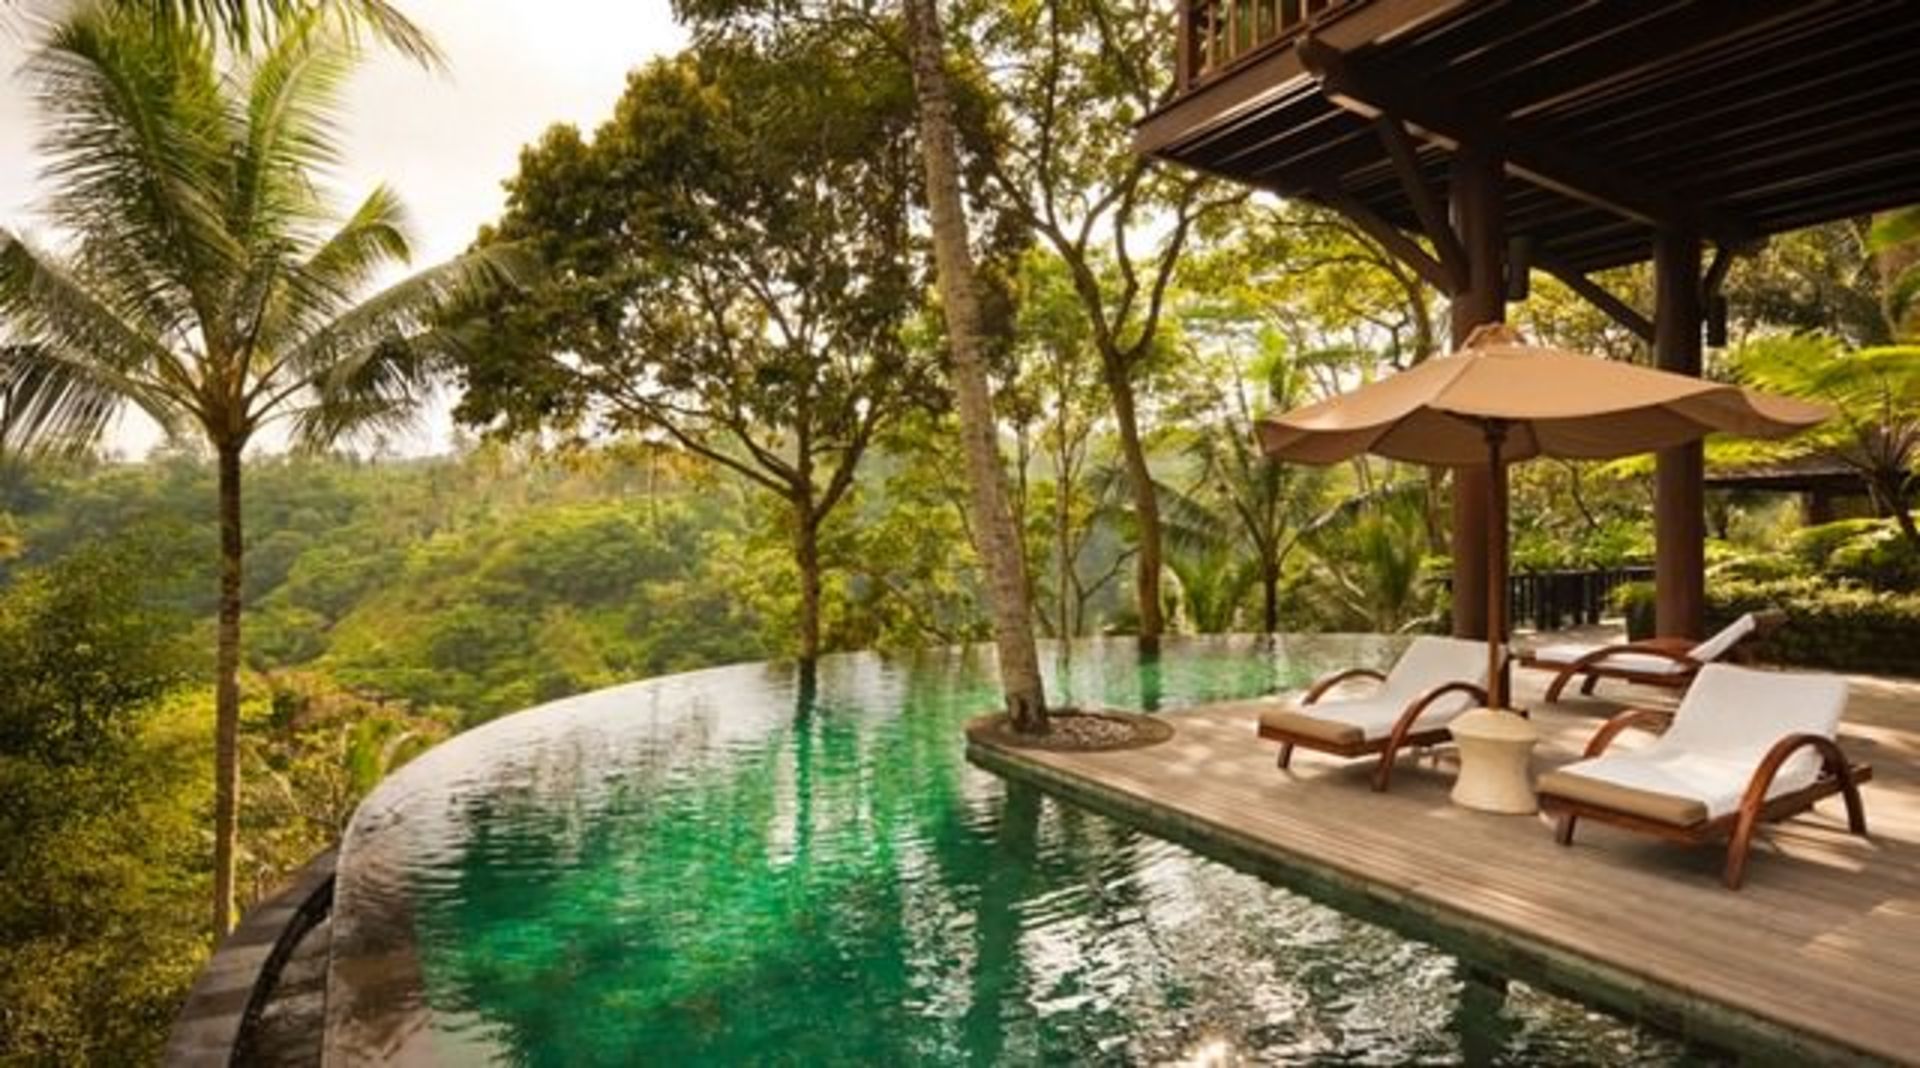 bali-most-relaxing-places-in-the-world